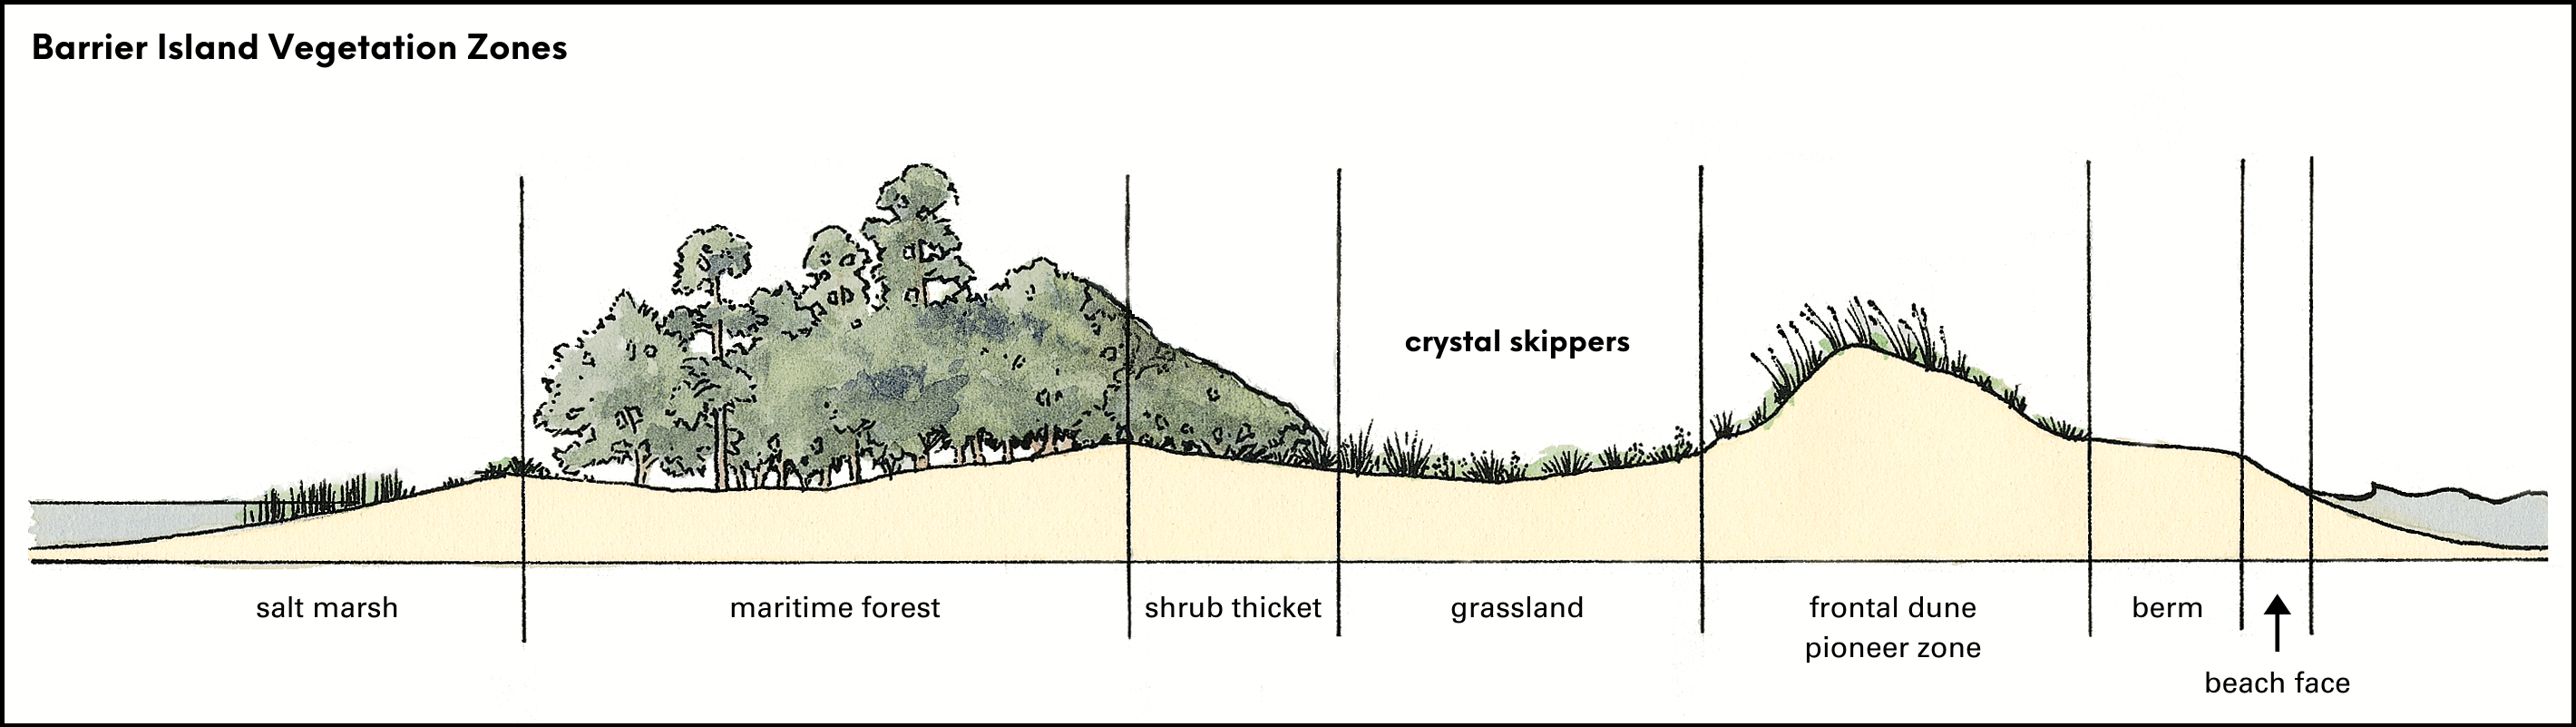 Crystal skippers rely on dune vegetation that grows in swales between sea oats and shrub thickets. Adapted from an illustration by David Williams for The Dune Book